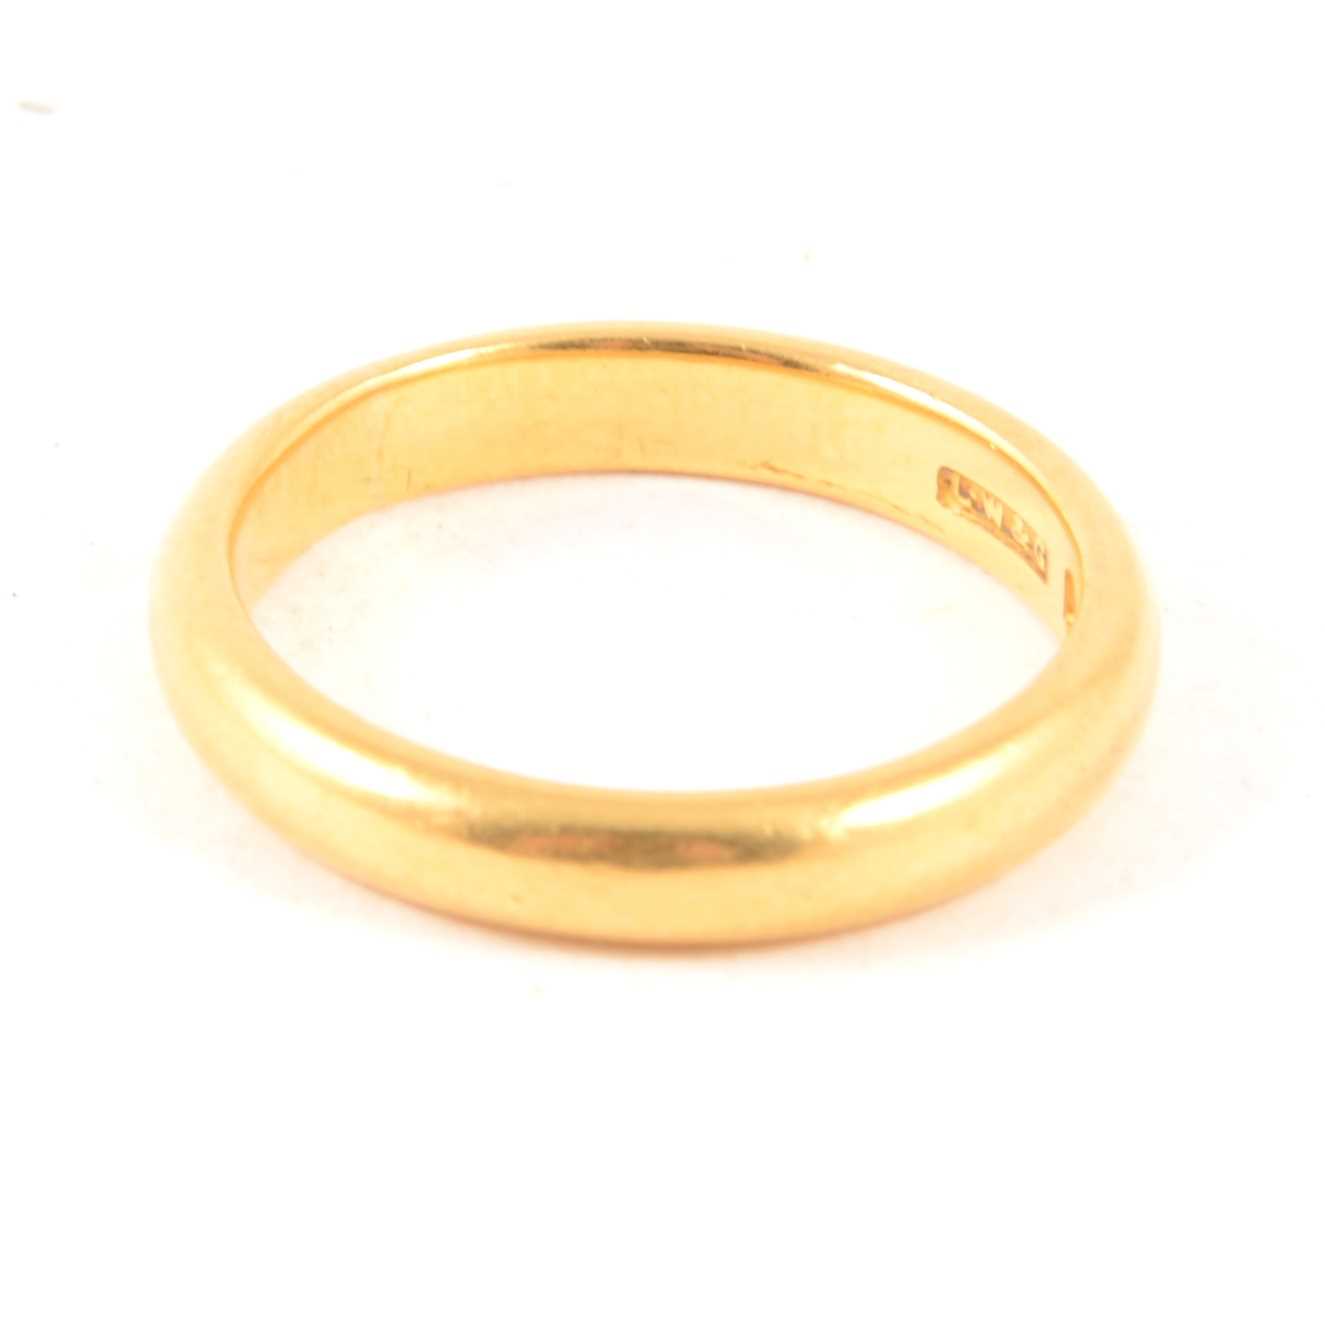 Lot 223 - A 22 carat gold wedding band, 3mm wide D shape, approximate weight 4.8gms, ring size L.